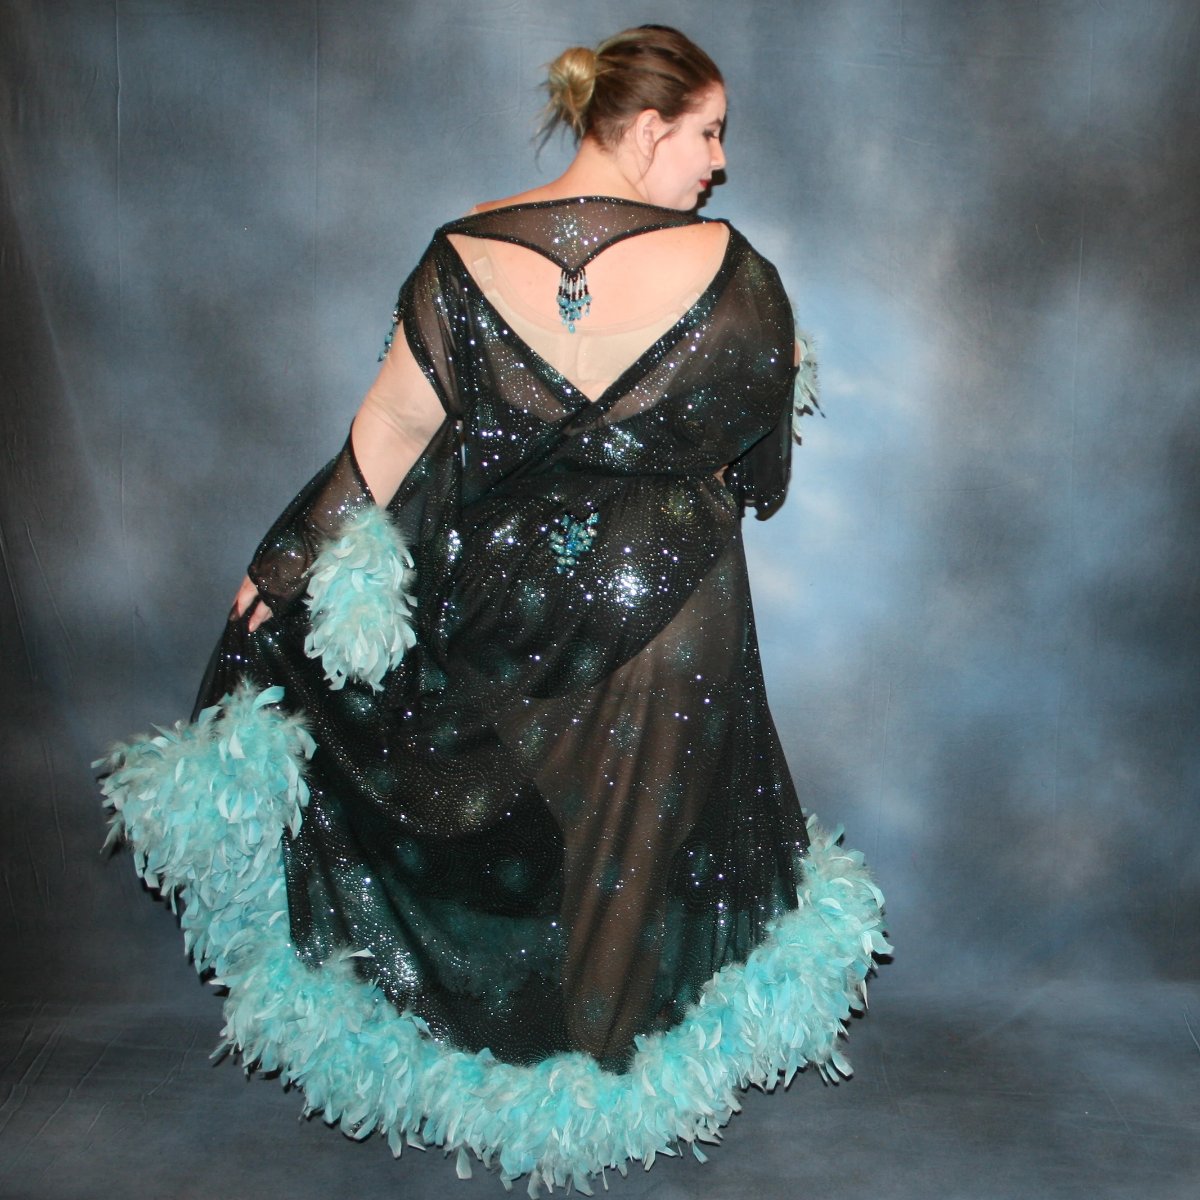 Black Plus Size Ballroom Dress | Turquoise Accents | Size 17/18-21/22 Crystal's Creations